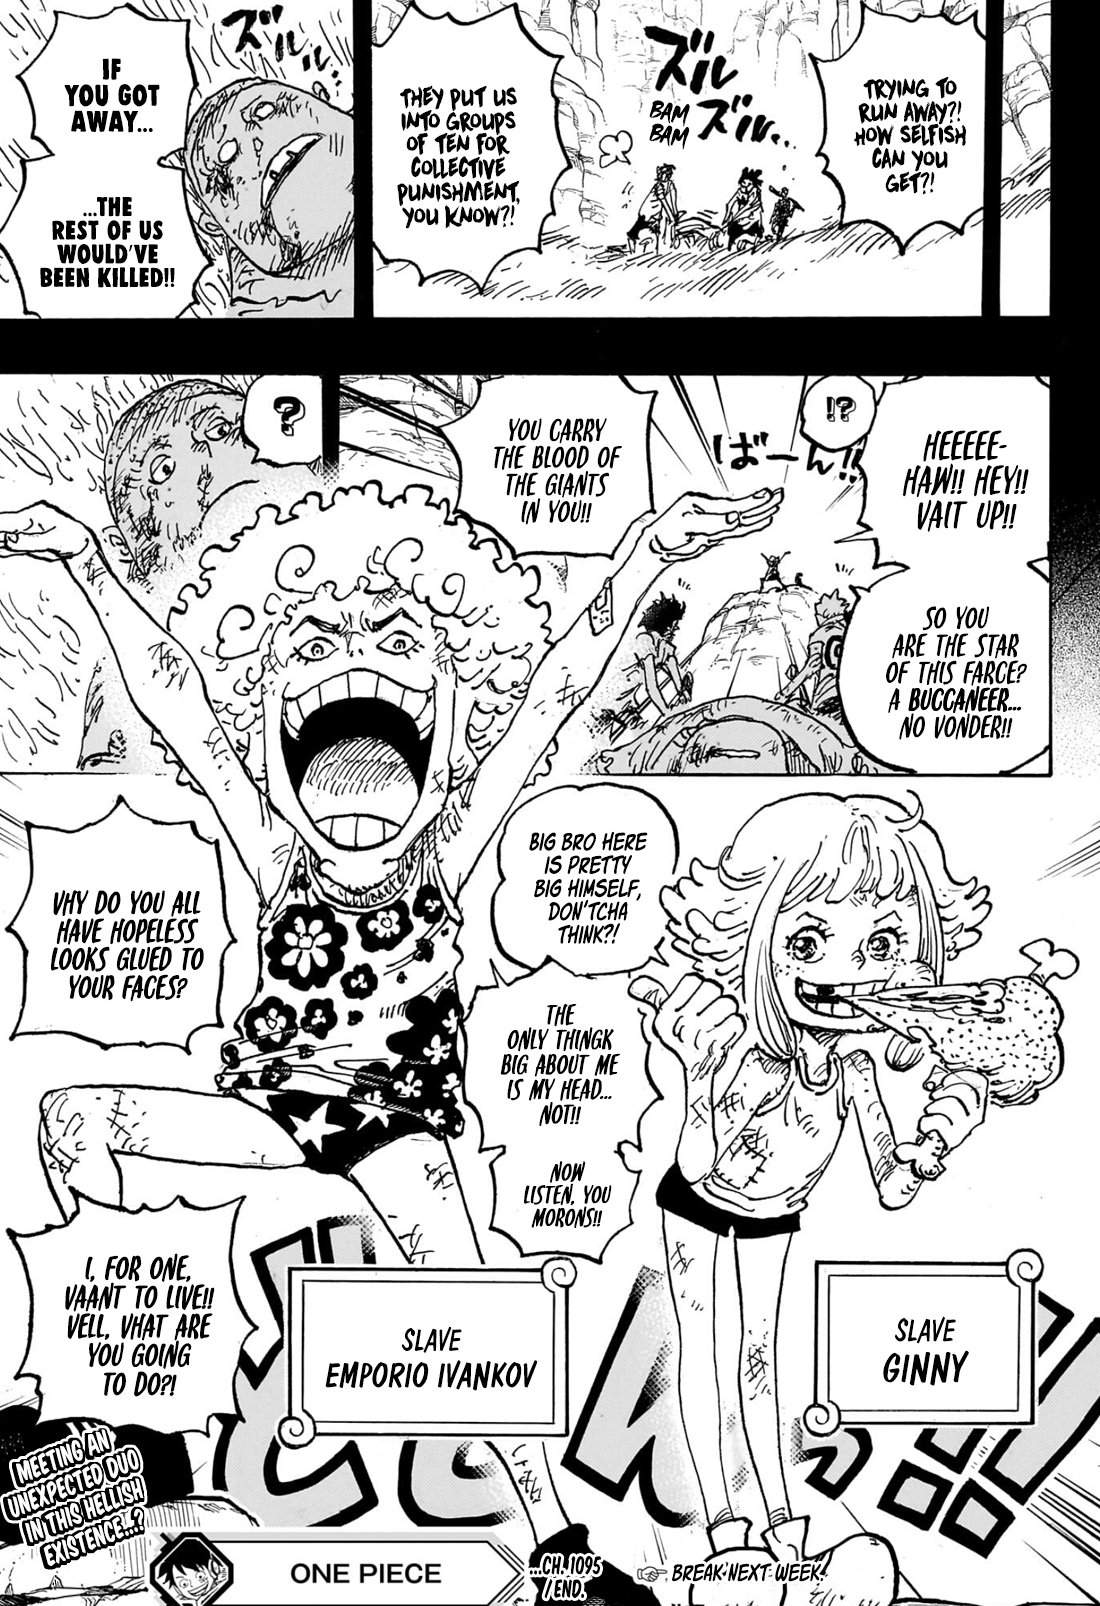 One Piece Chapter 1095 Discussion, Page 15